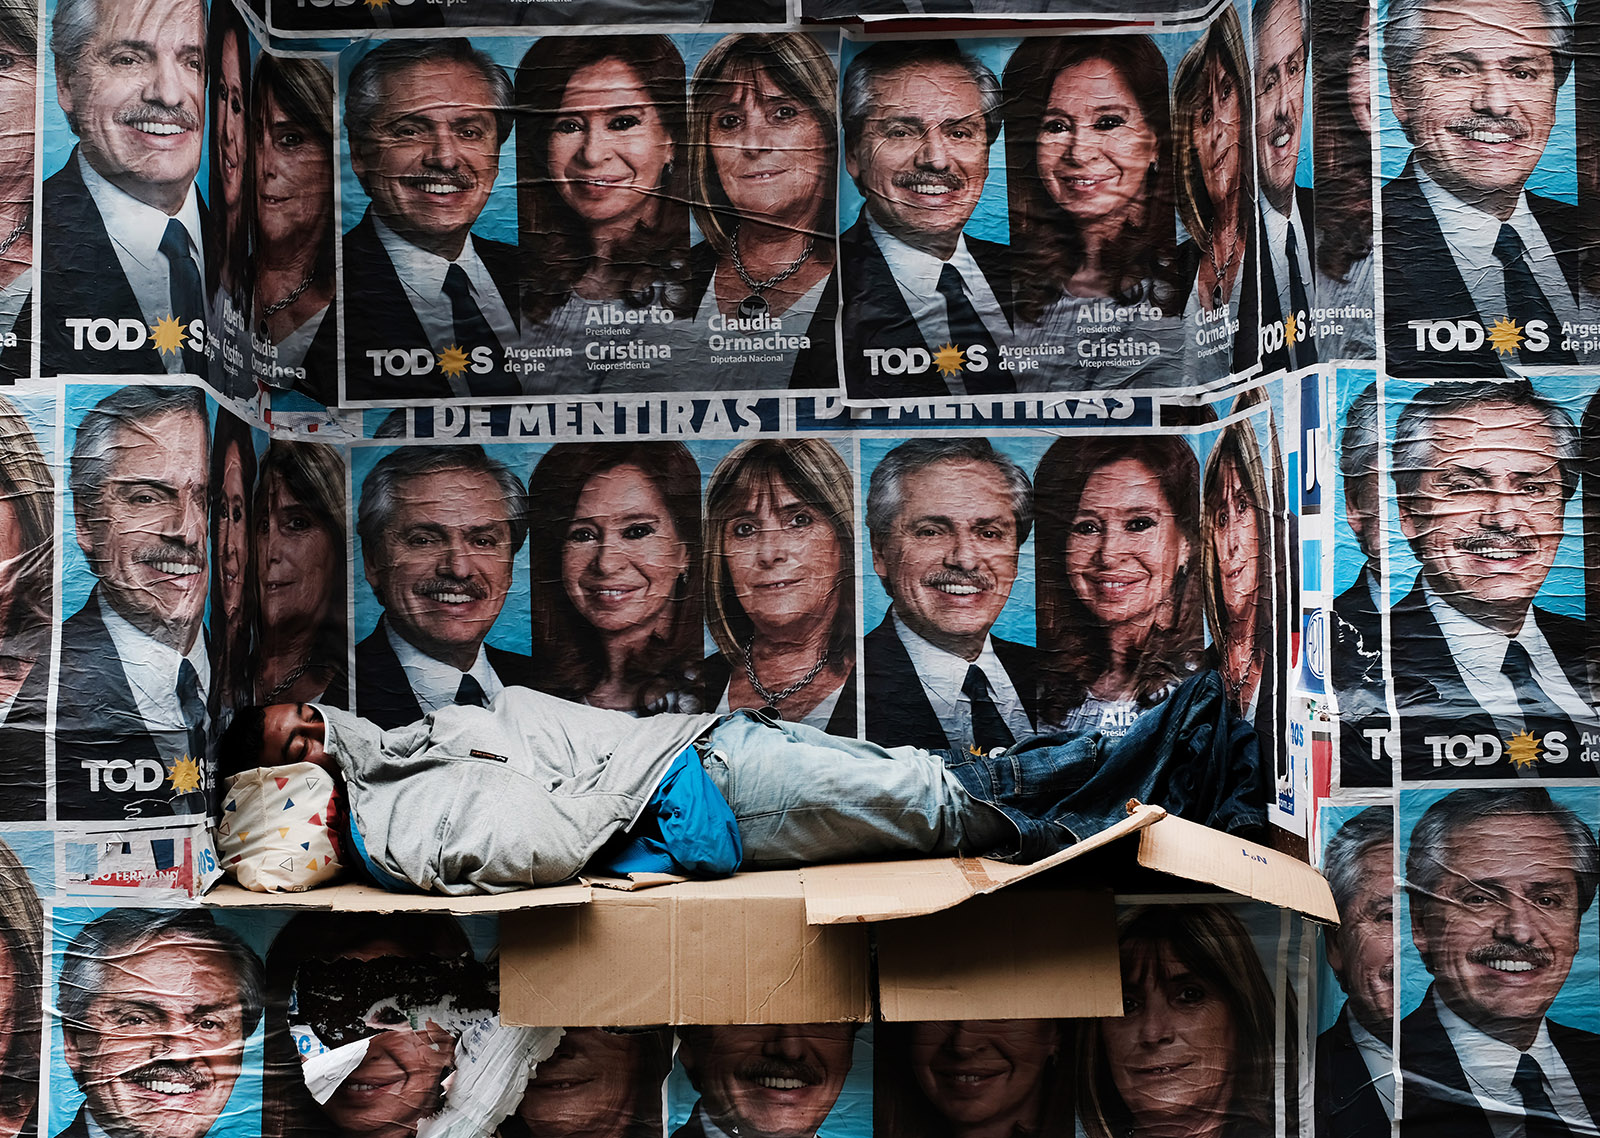 A homeless man sleeping under posters of newly elected President Alberto Fernández and his running mate, Vice-President Cristina Fernández de Kirchner, Buenos Aires, October 28, 2019 